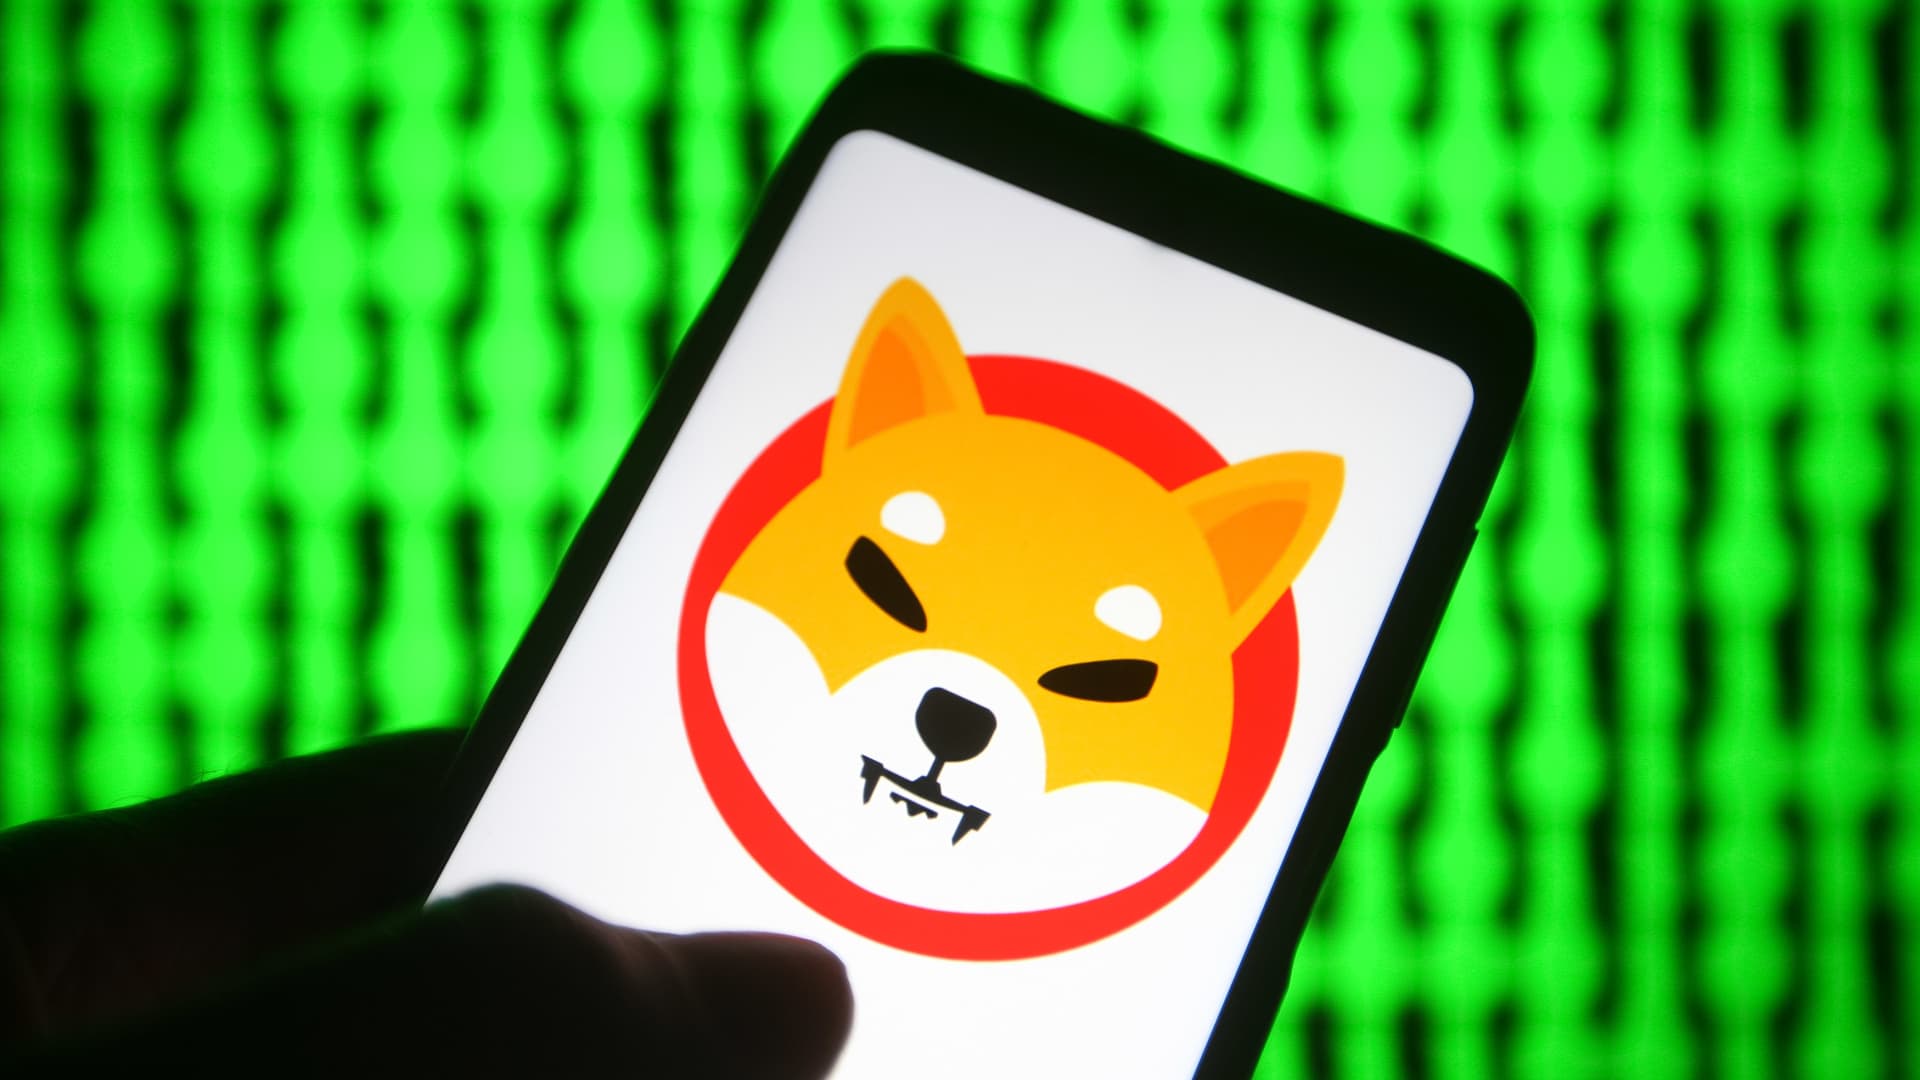 Shiba inu is up over 100% in the last 7 days—here's what to know before investing